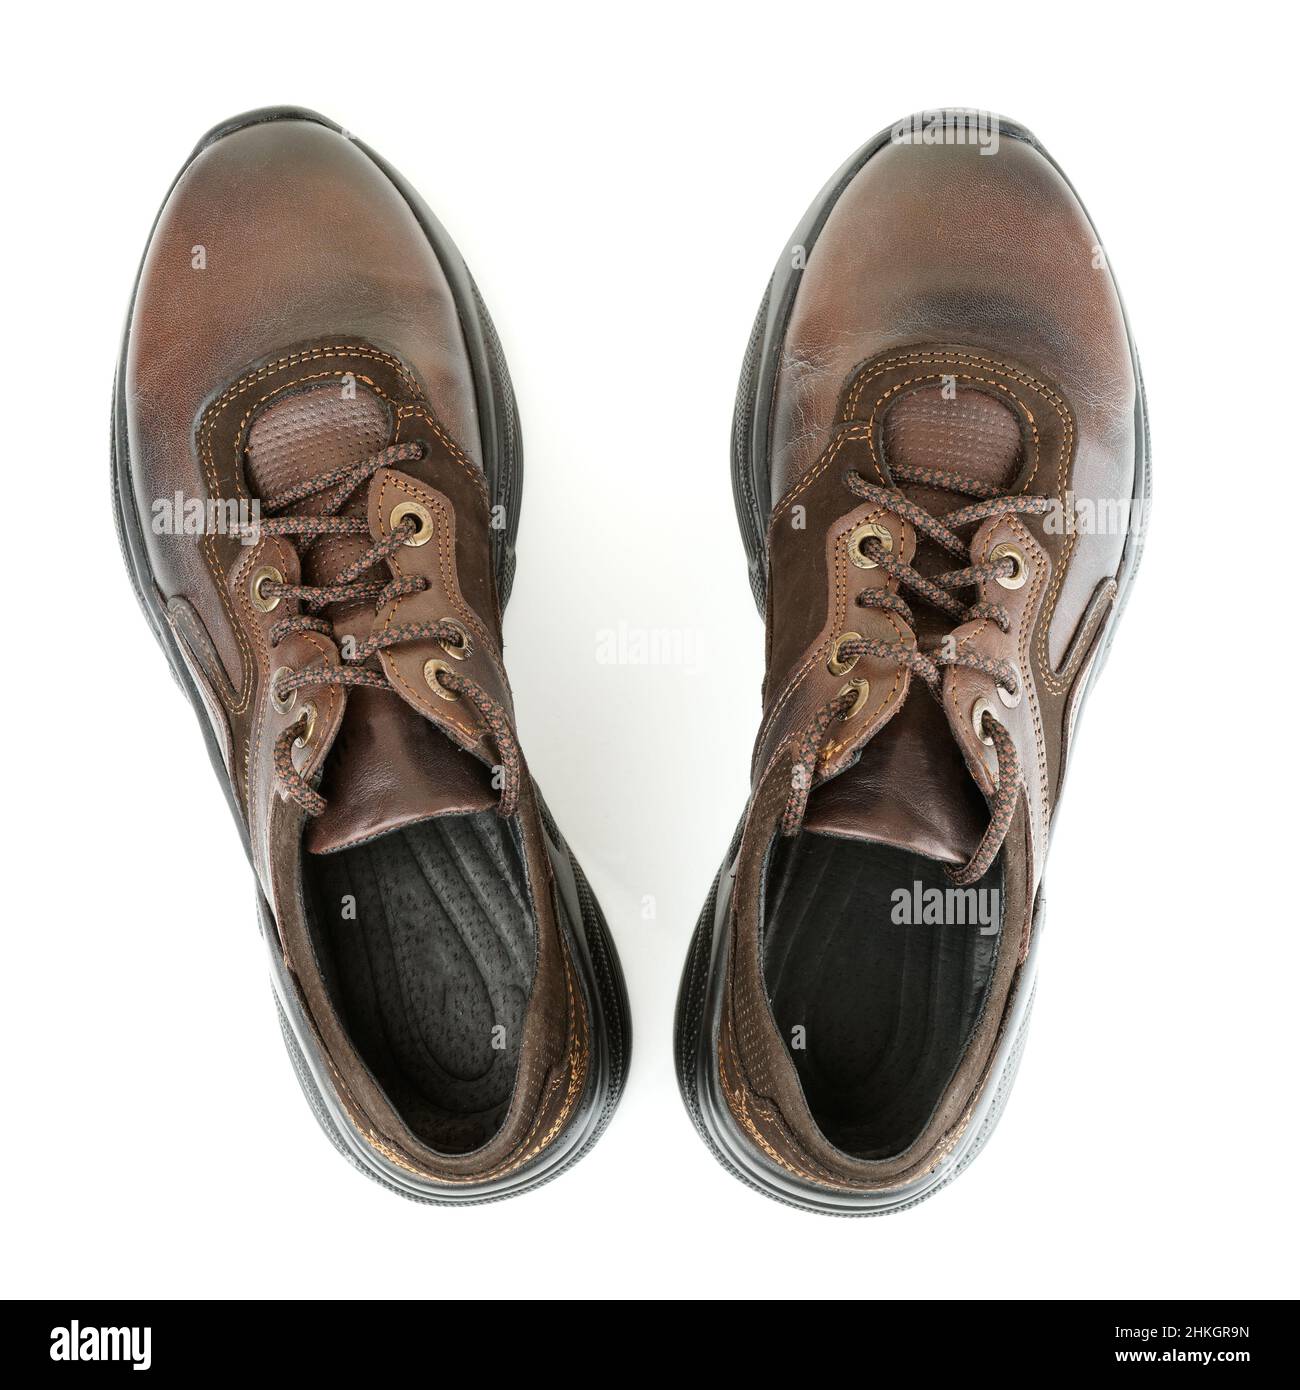 Pair of brown leather shoes shot from above on white background Stock Photo